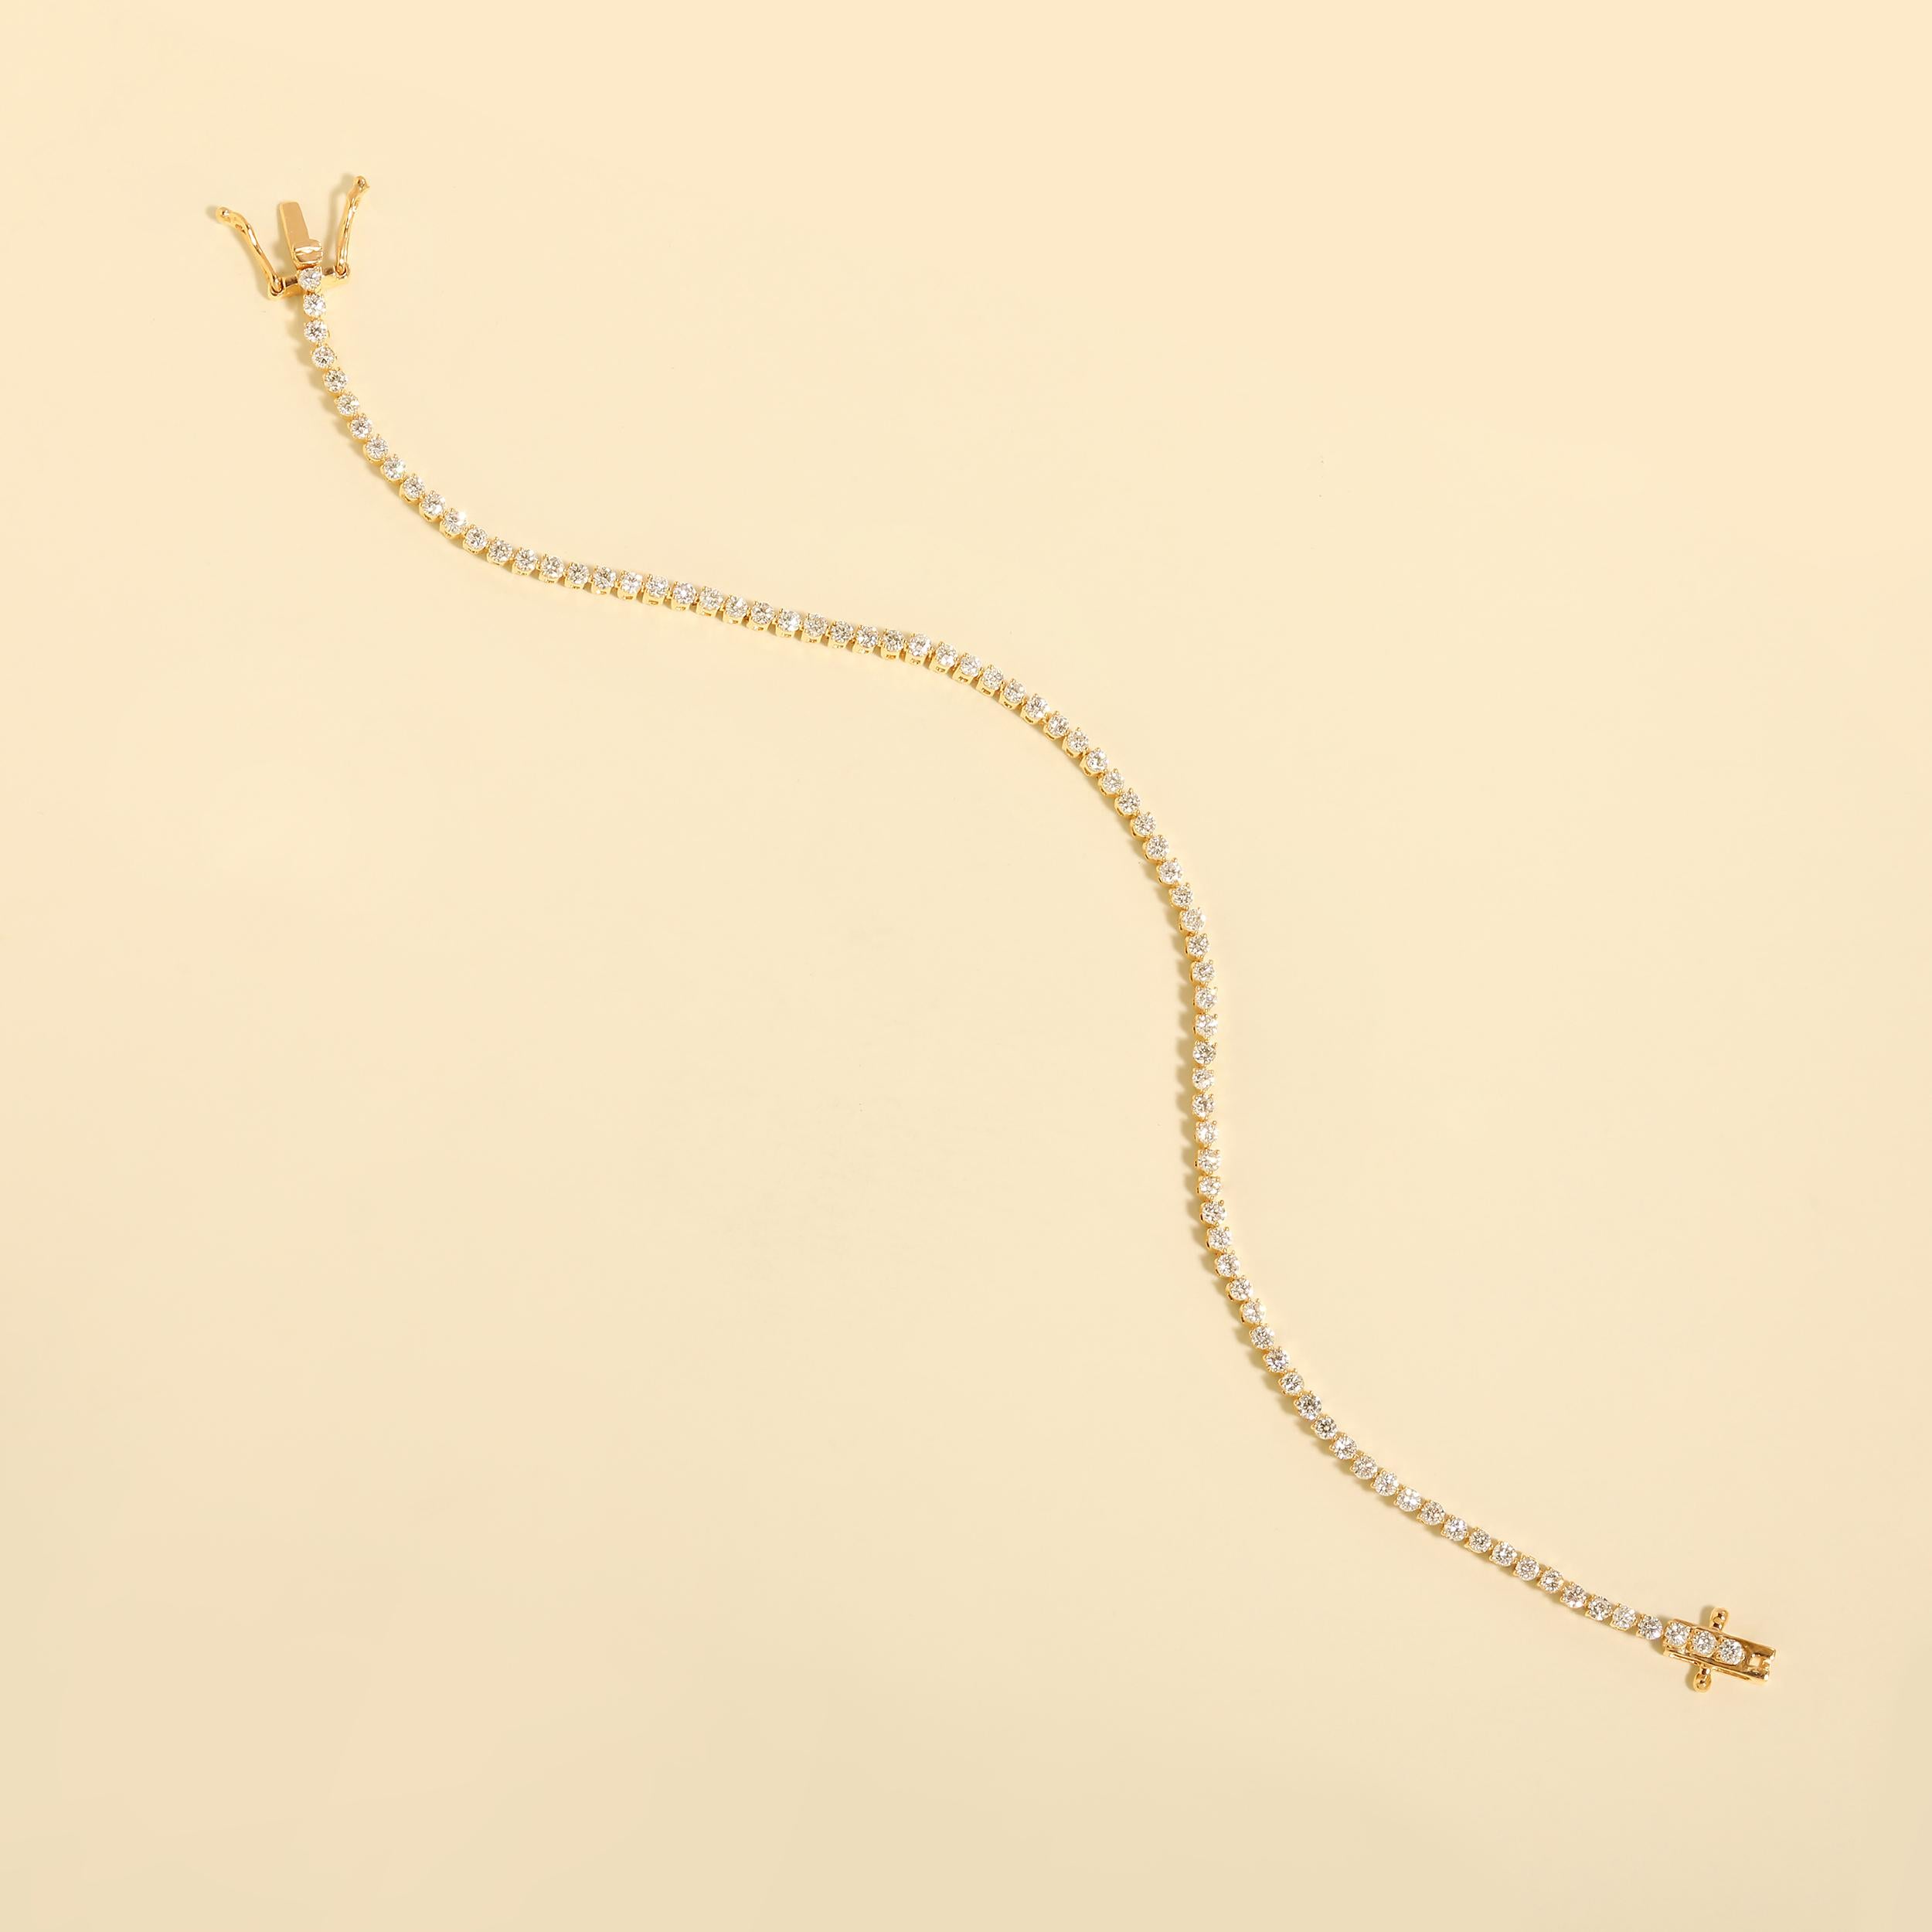 Crafted in 7.67 grams of 14K Yellow Gold, the bracelet contains 66 stones of Round Natural Diamonds with a total of 2.93 carat in G-H color and VS-SI clarity. The bracelet length is 7 inches.

CONTEMPORARY AND TIMELESS ESSENCE: Crafted in